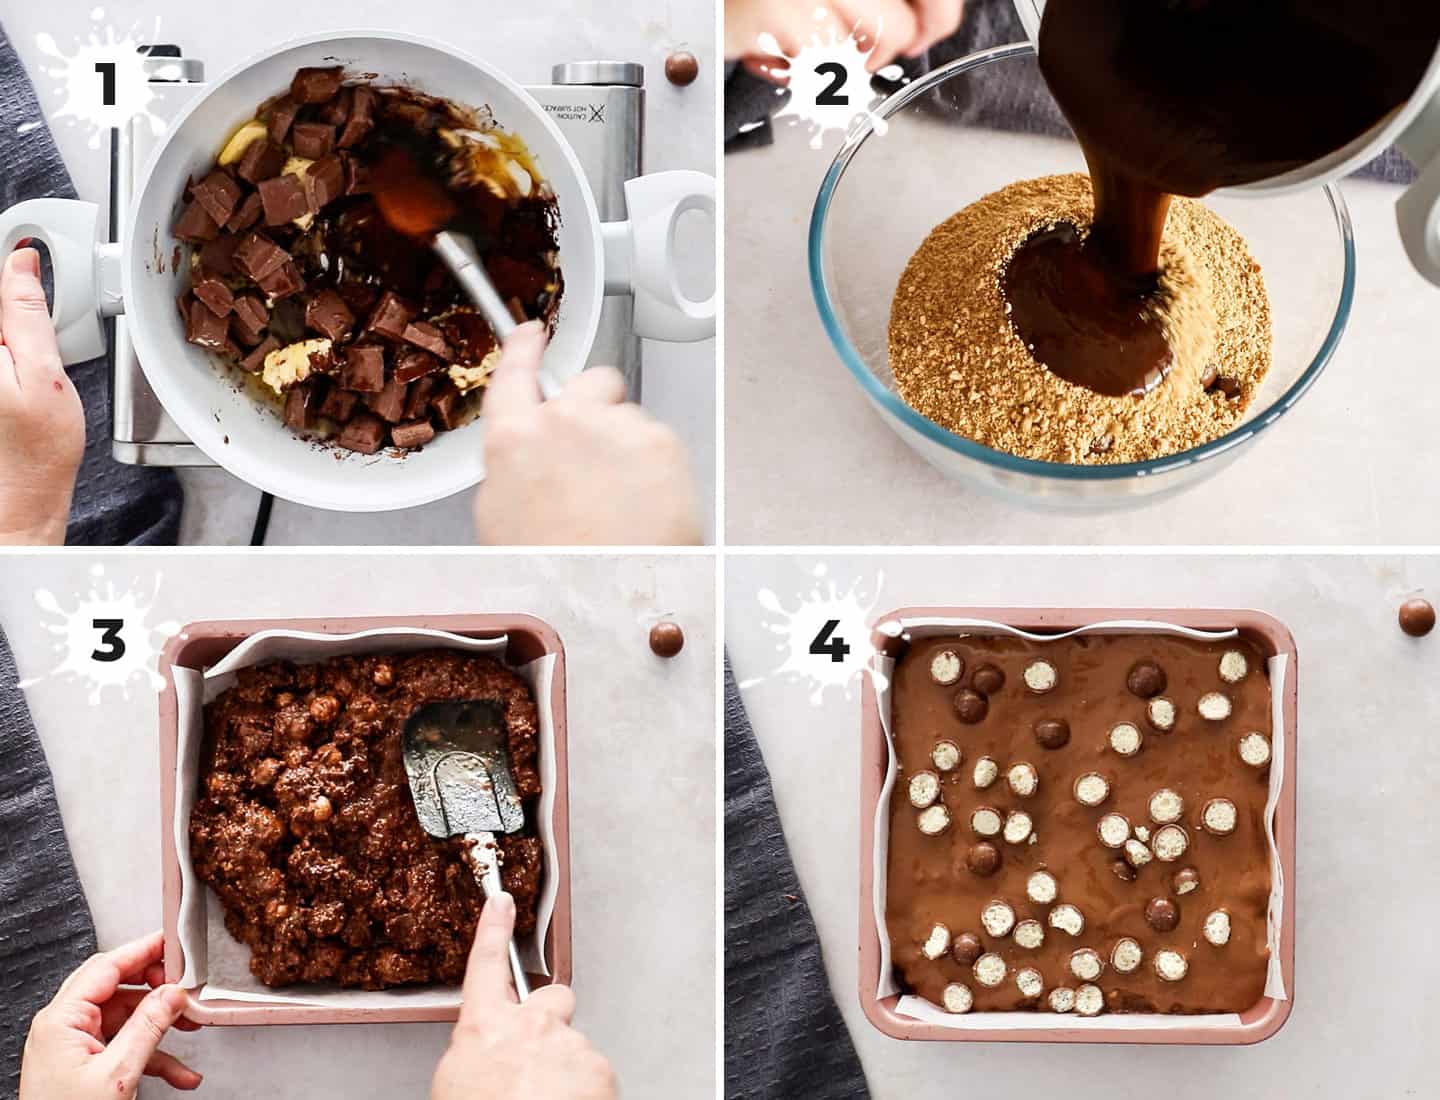 A collage of 4 images showing how to make Malteser Traybake.